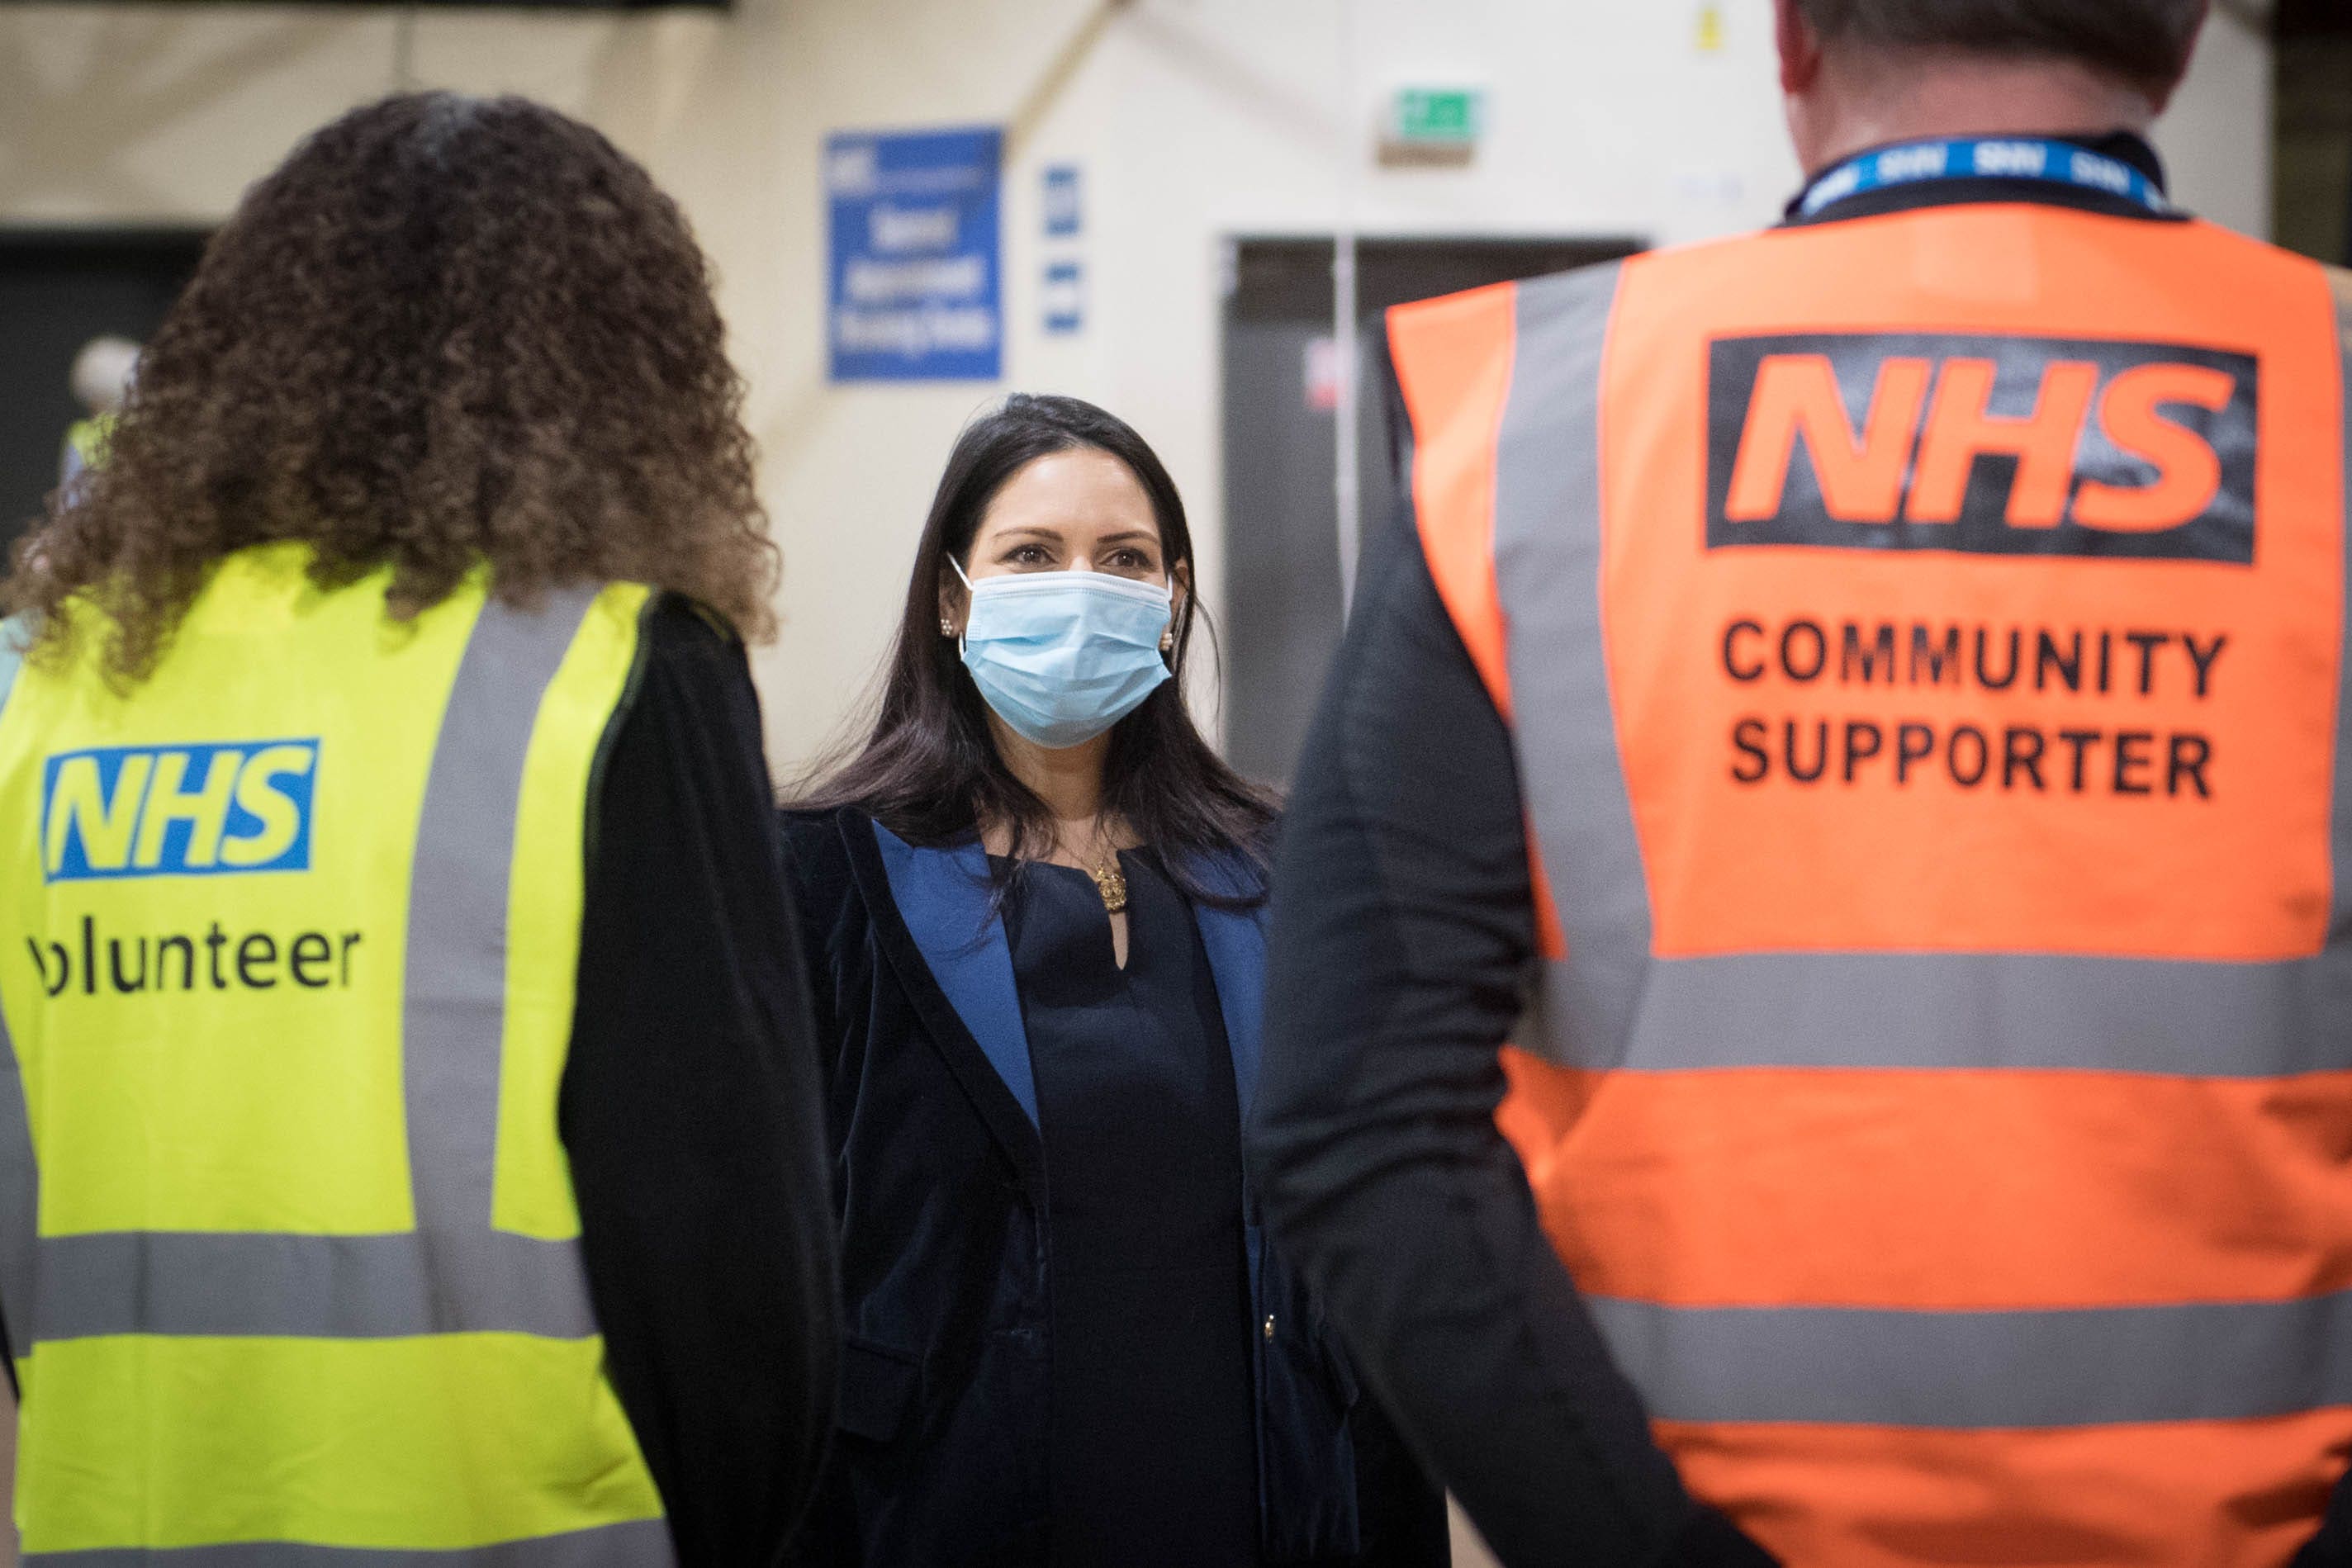 Volunteers were vital for the NHS during the Covid-19 pandemic (Stefan Rousseau/PA)